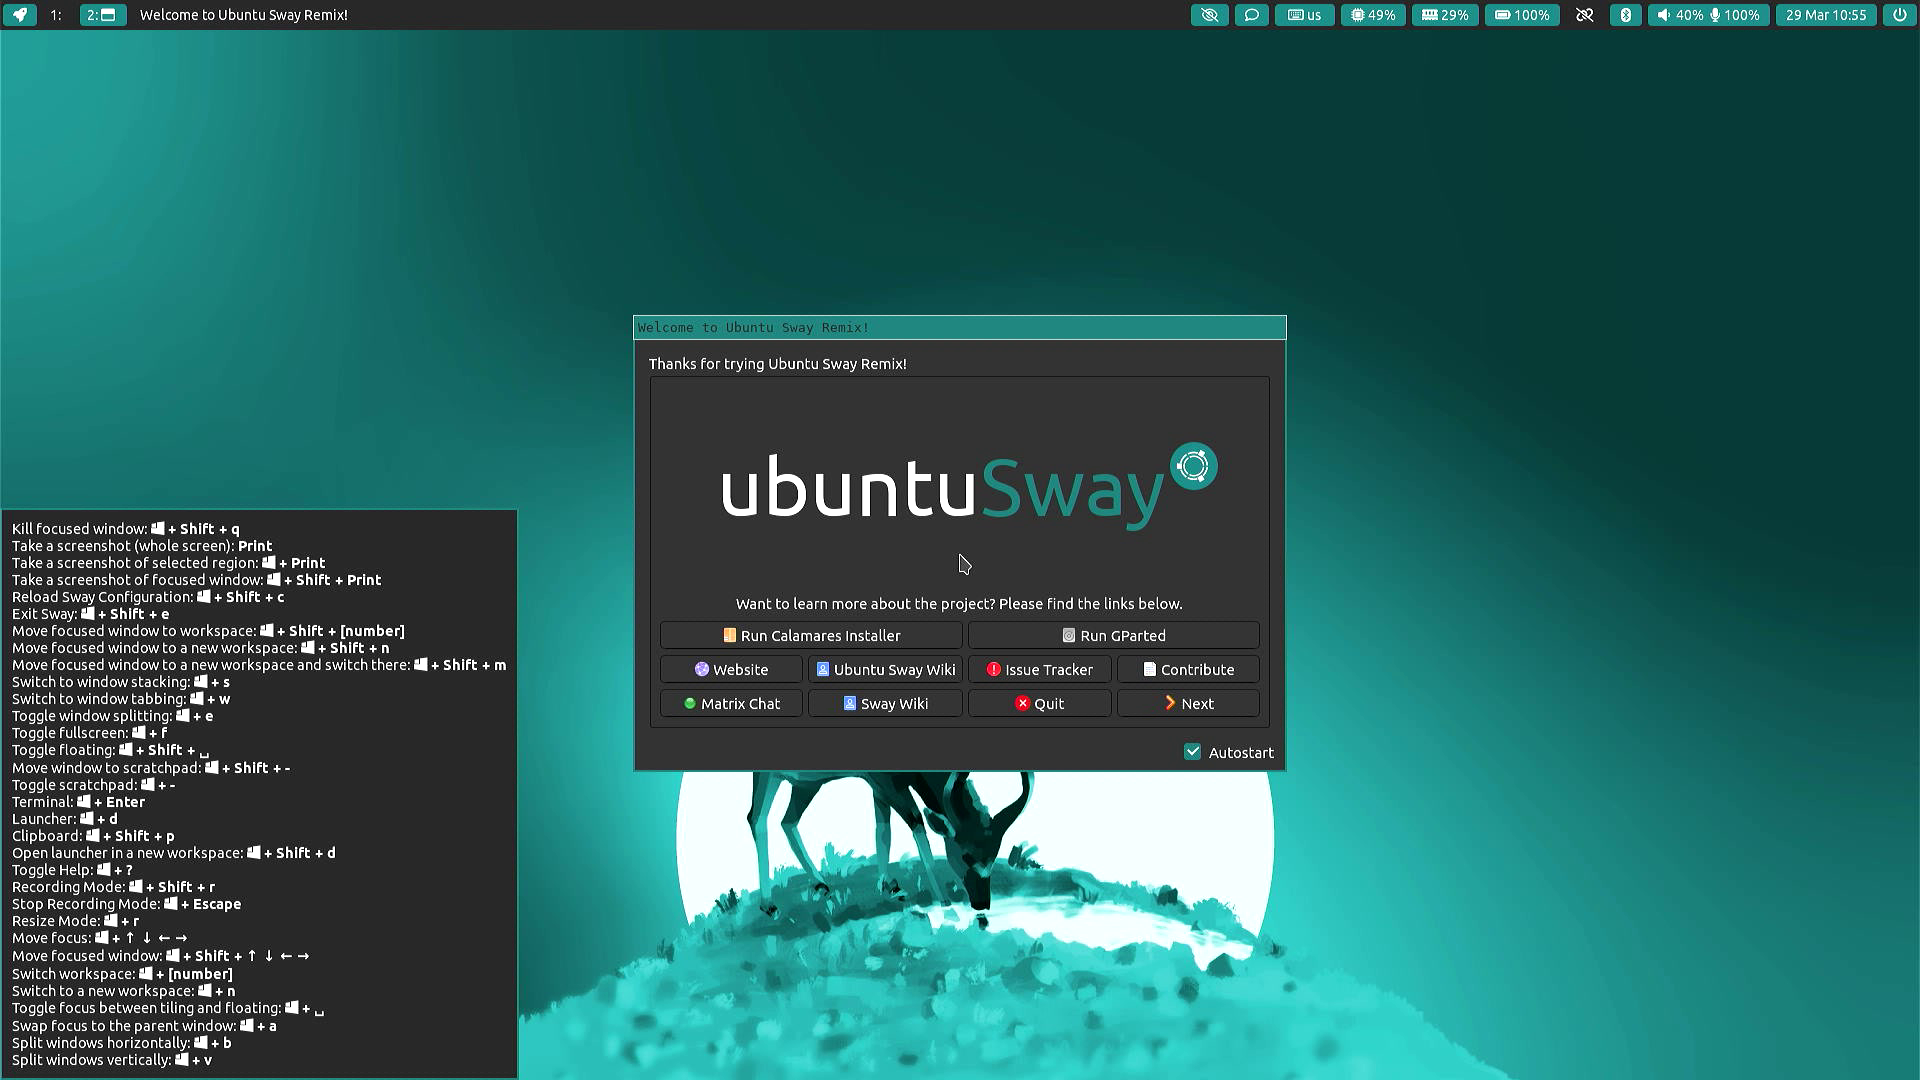 On-call with the Asus Transformer T100 & Ubuntu Sway